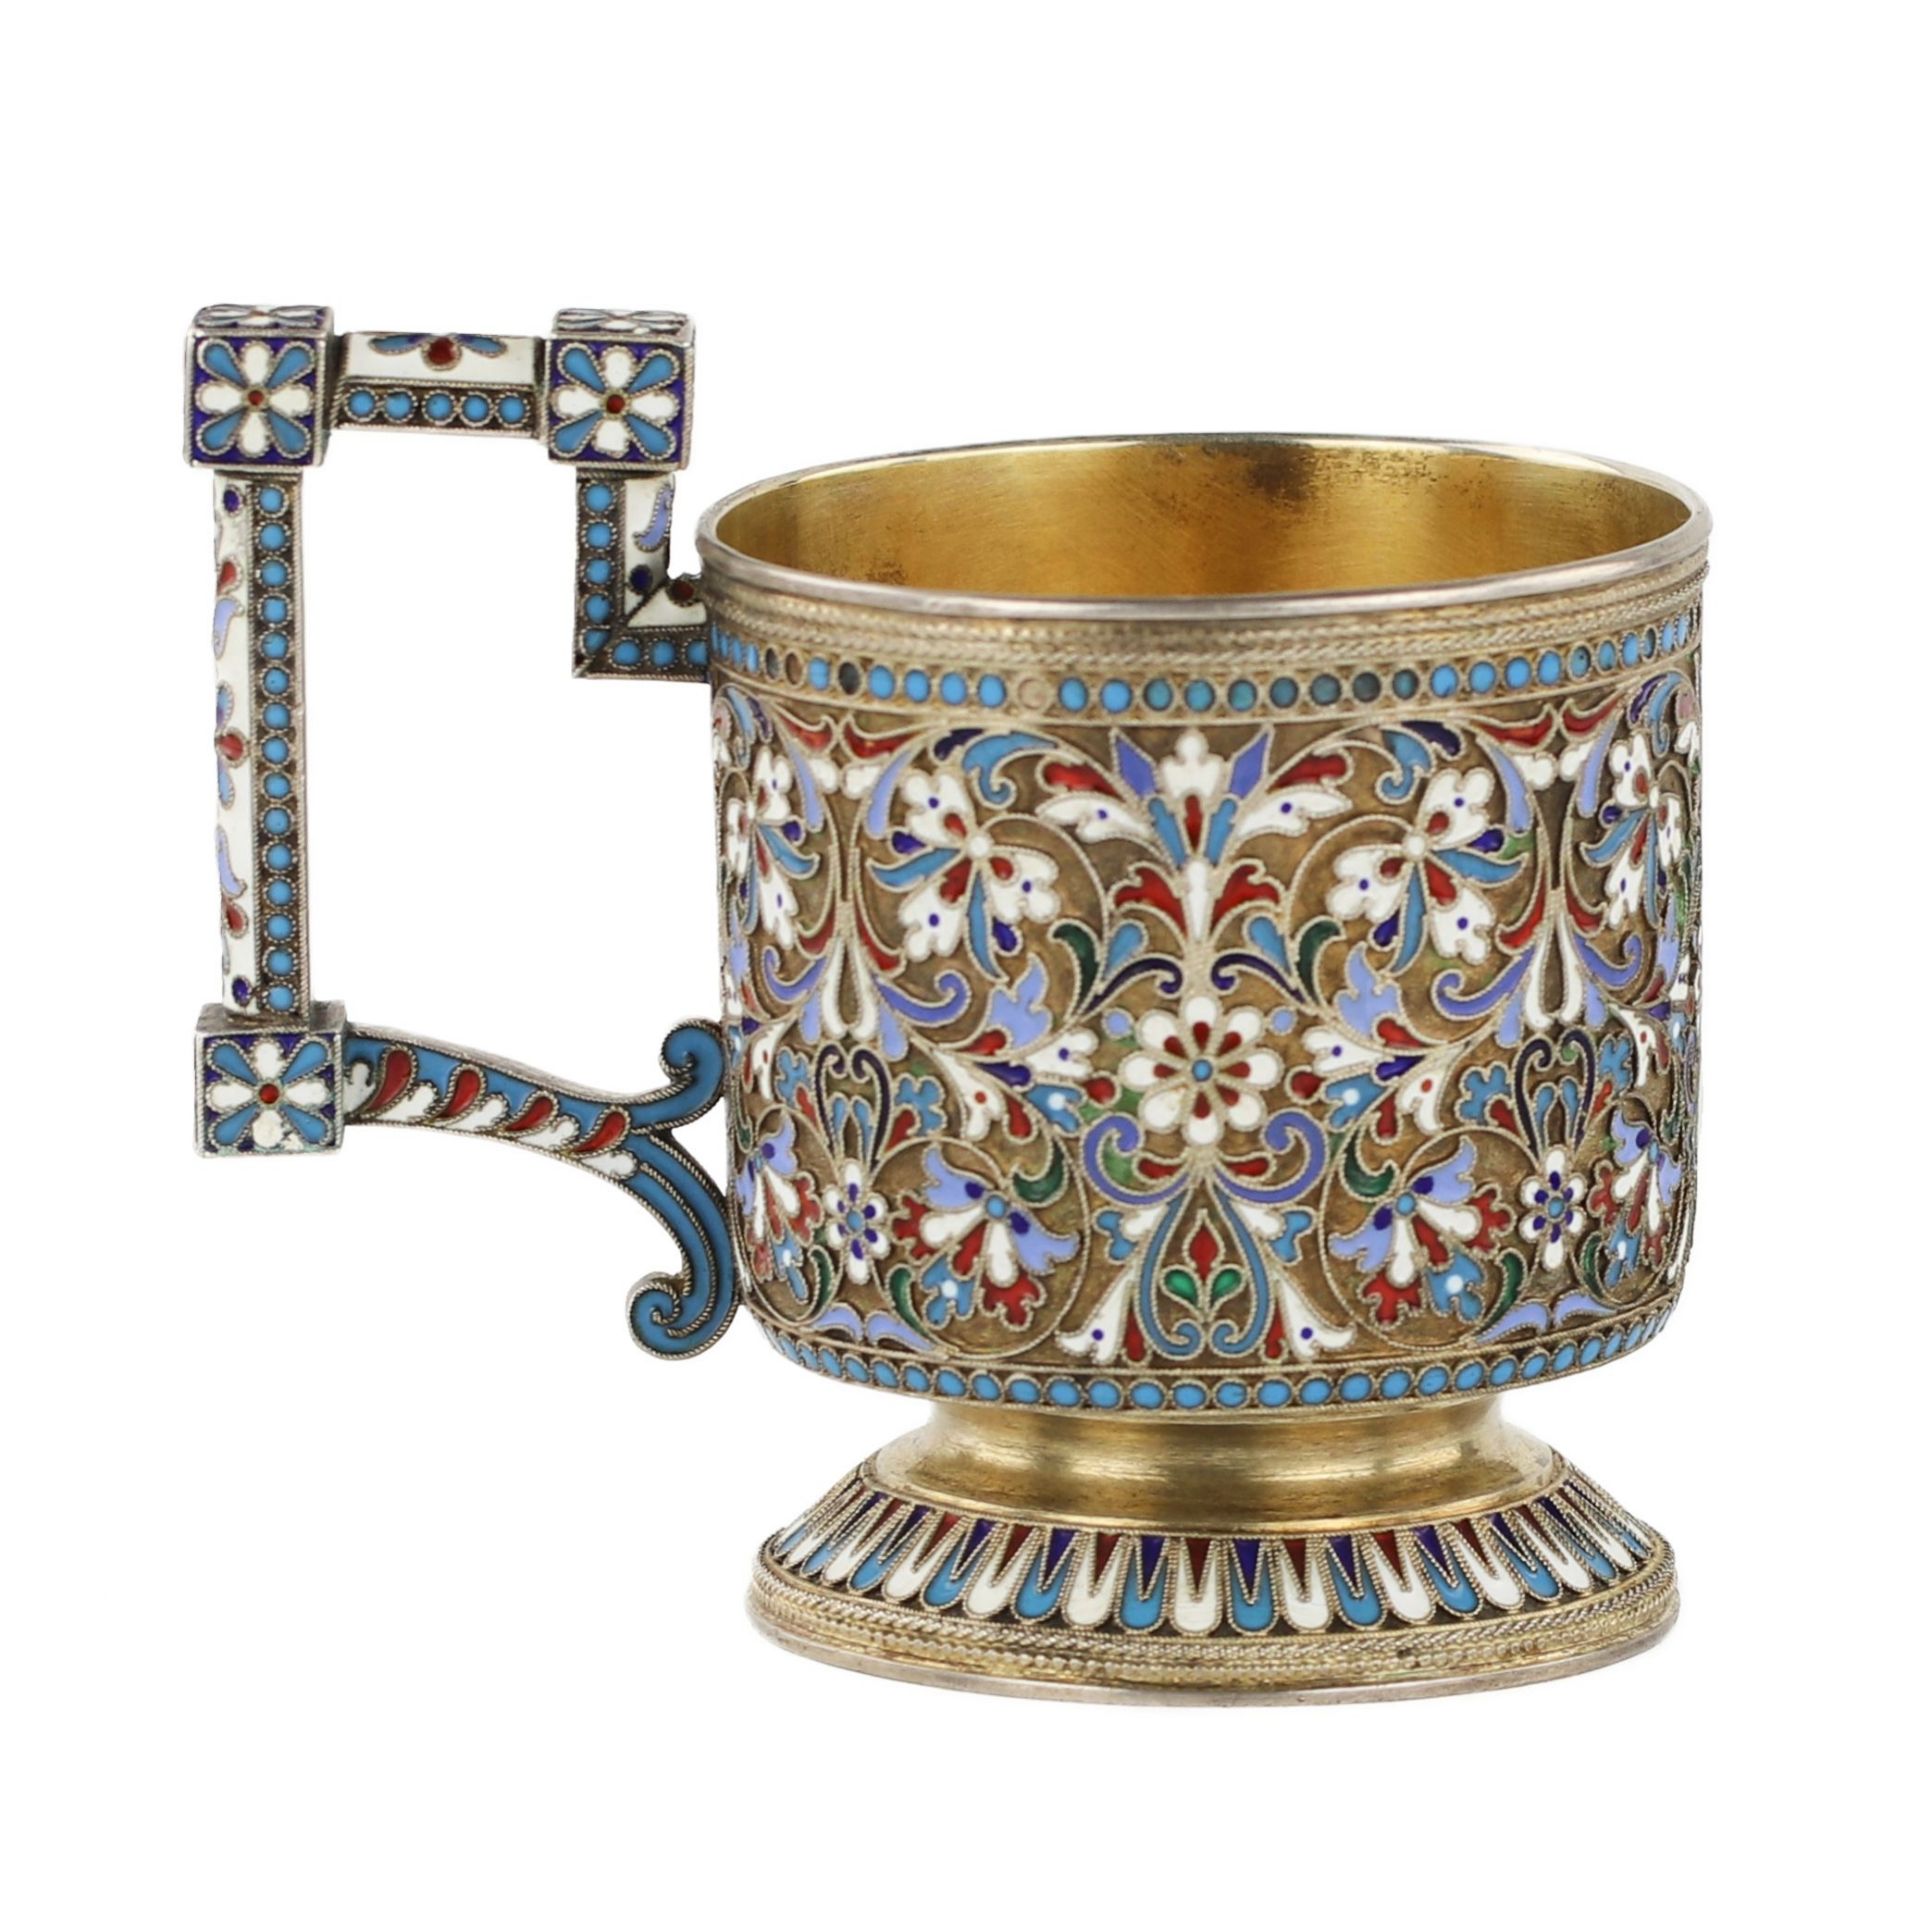 N.V. Alekseev. Silver glass holder in cloisonne enamels. Moscow. The turn of the 19th and 20th cent - Image 3 of 8